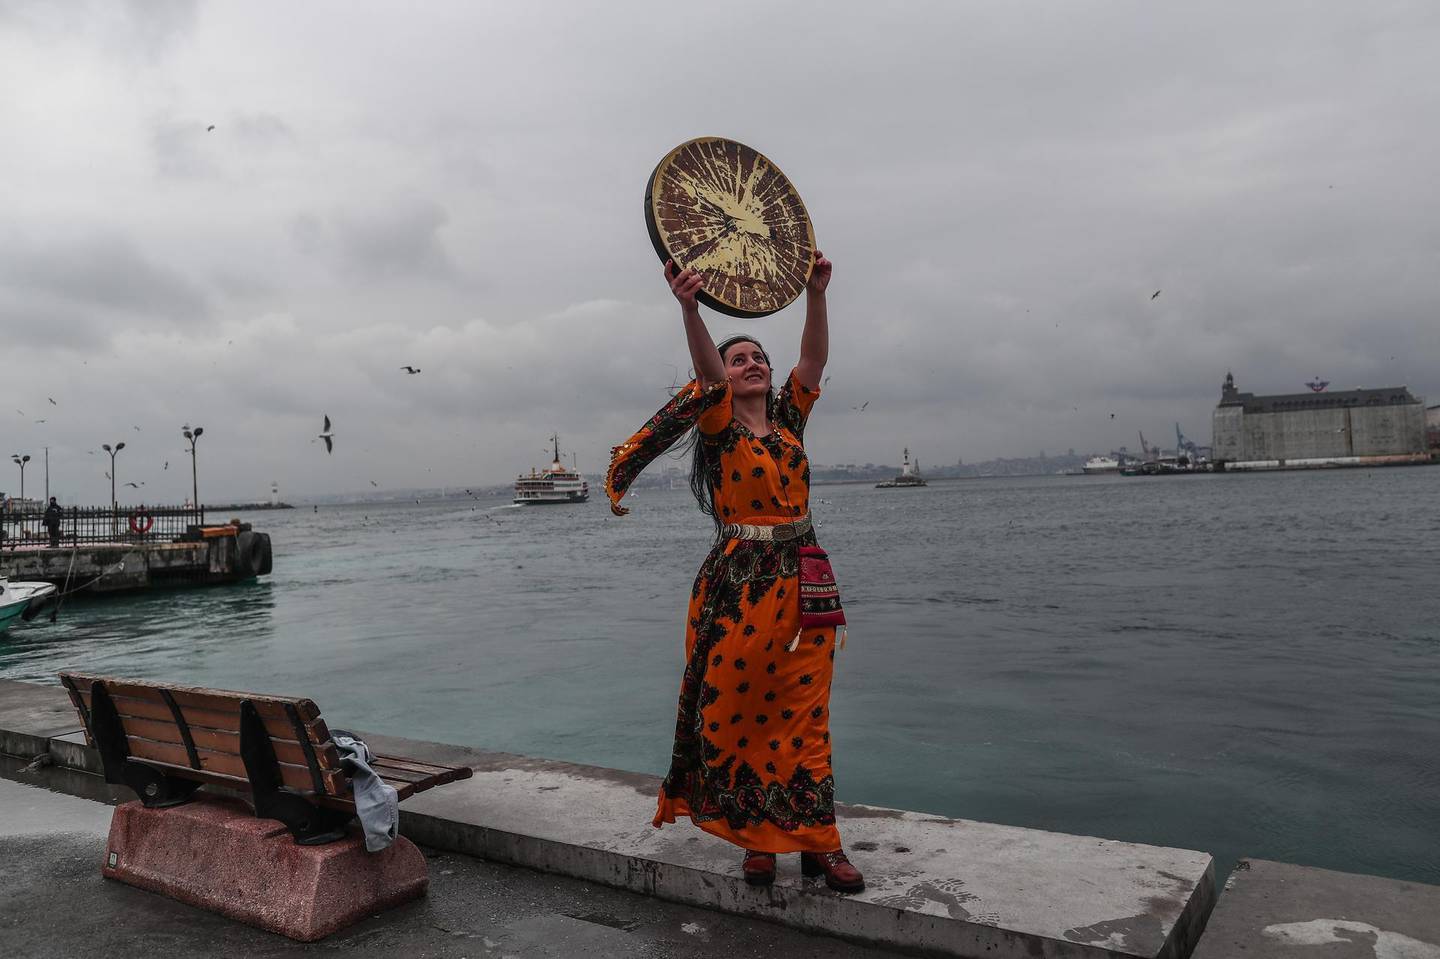 epa09057077 A Kurdish woman holds traditional instrument as she poses for her friend during a demonstration on the occasion of the International Day for the Elimination of Violence Against Women in Istanbul, Turkey, 06 March 2021. The International Day for the Elimination of Violence Against Women is an effort to raise awareness of the fact that women around the world are subject to rape, domestic violence and other forms of violence. According to the 'We'll Stop Femicide' social platform, 335 women were killed through gender violence and hundreds assaulted by men in 2020, in Turkey.  EPA/SEDAT SUNA